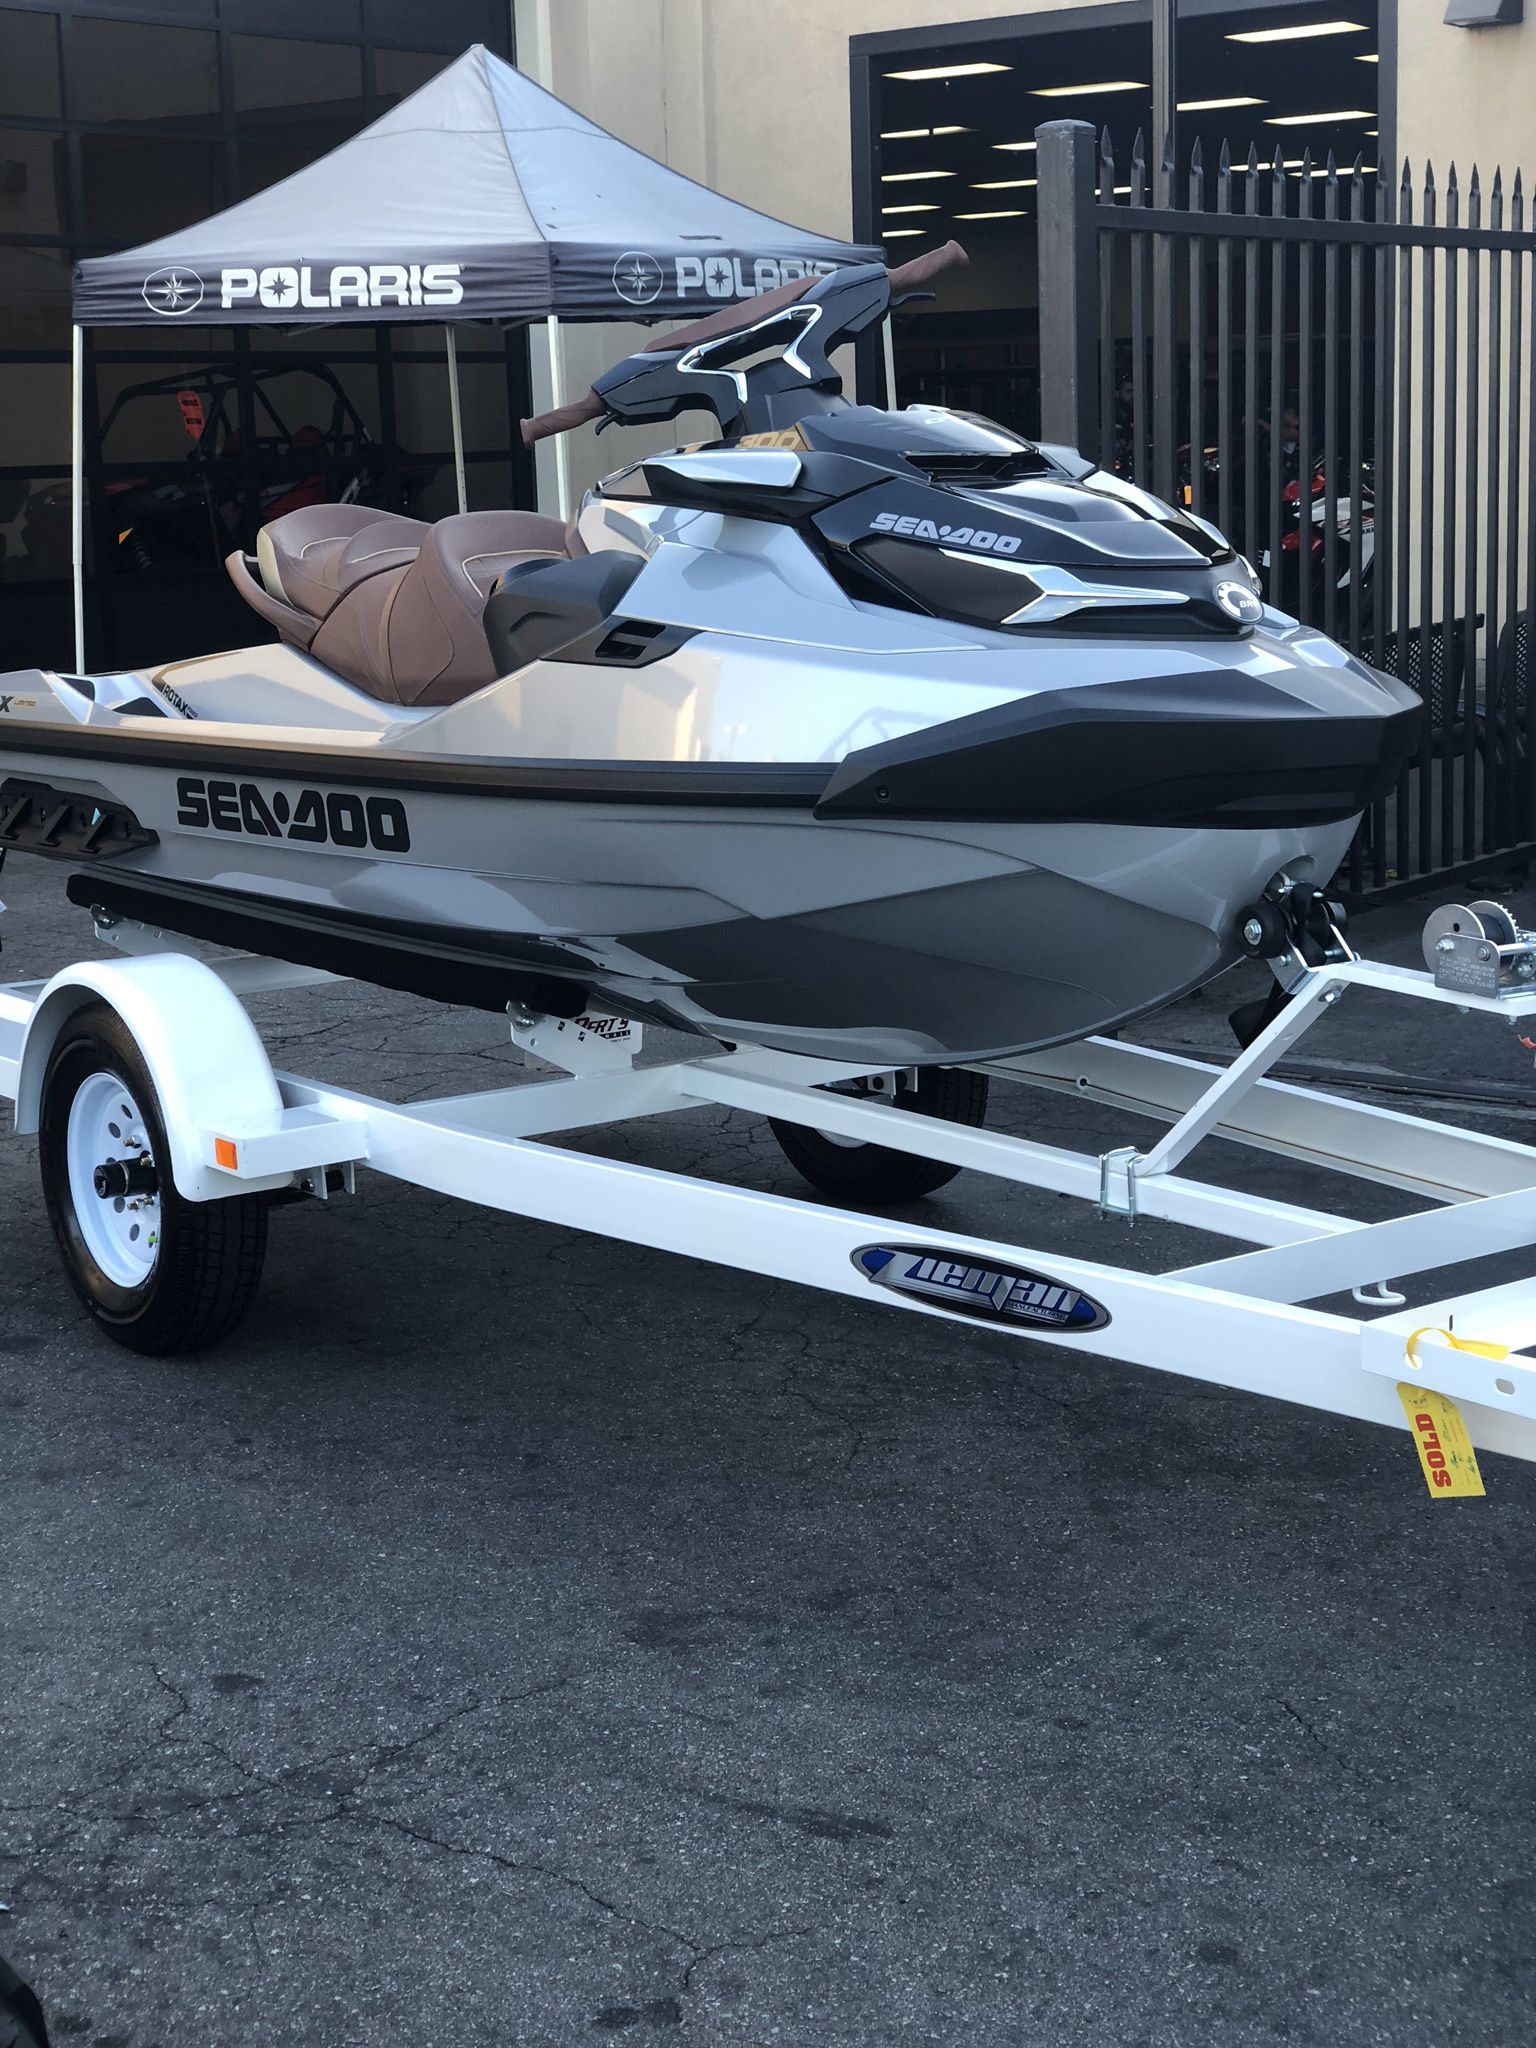 Seadoo 2019 GTX 300 Limited New Only 2 Hours On It Complete With Trailer And Cover